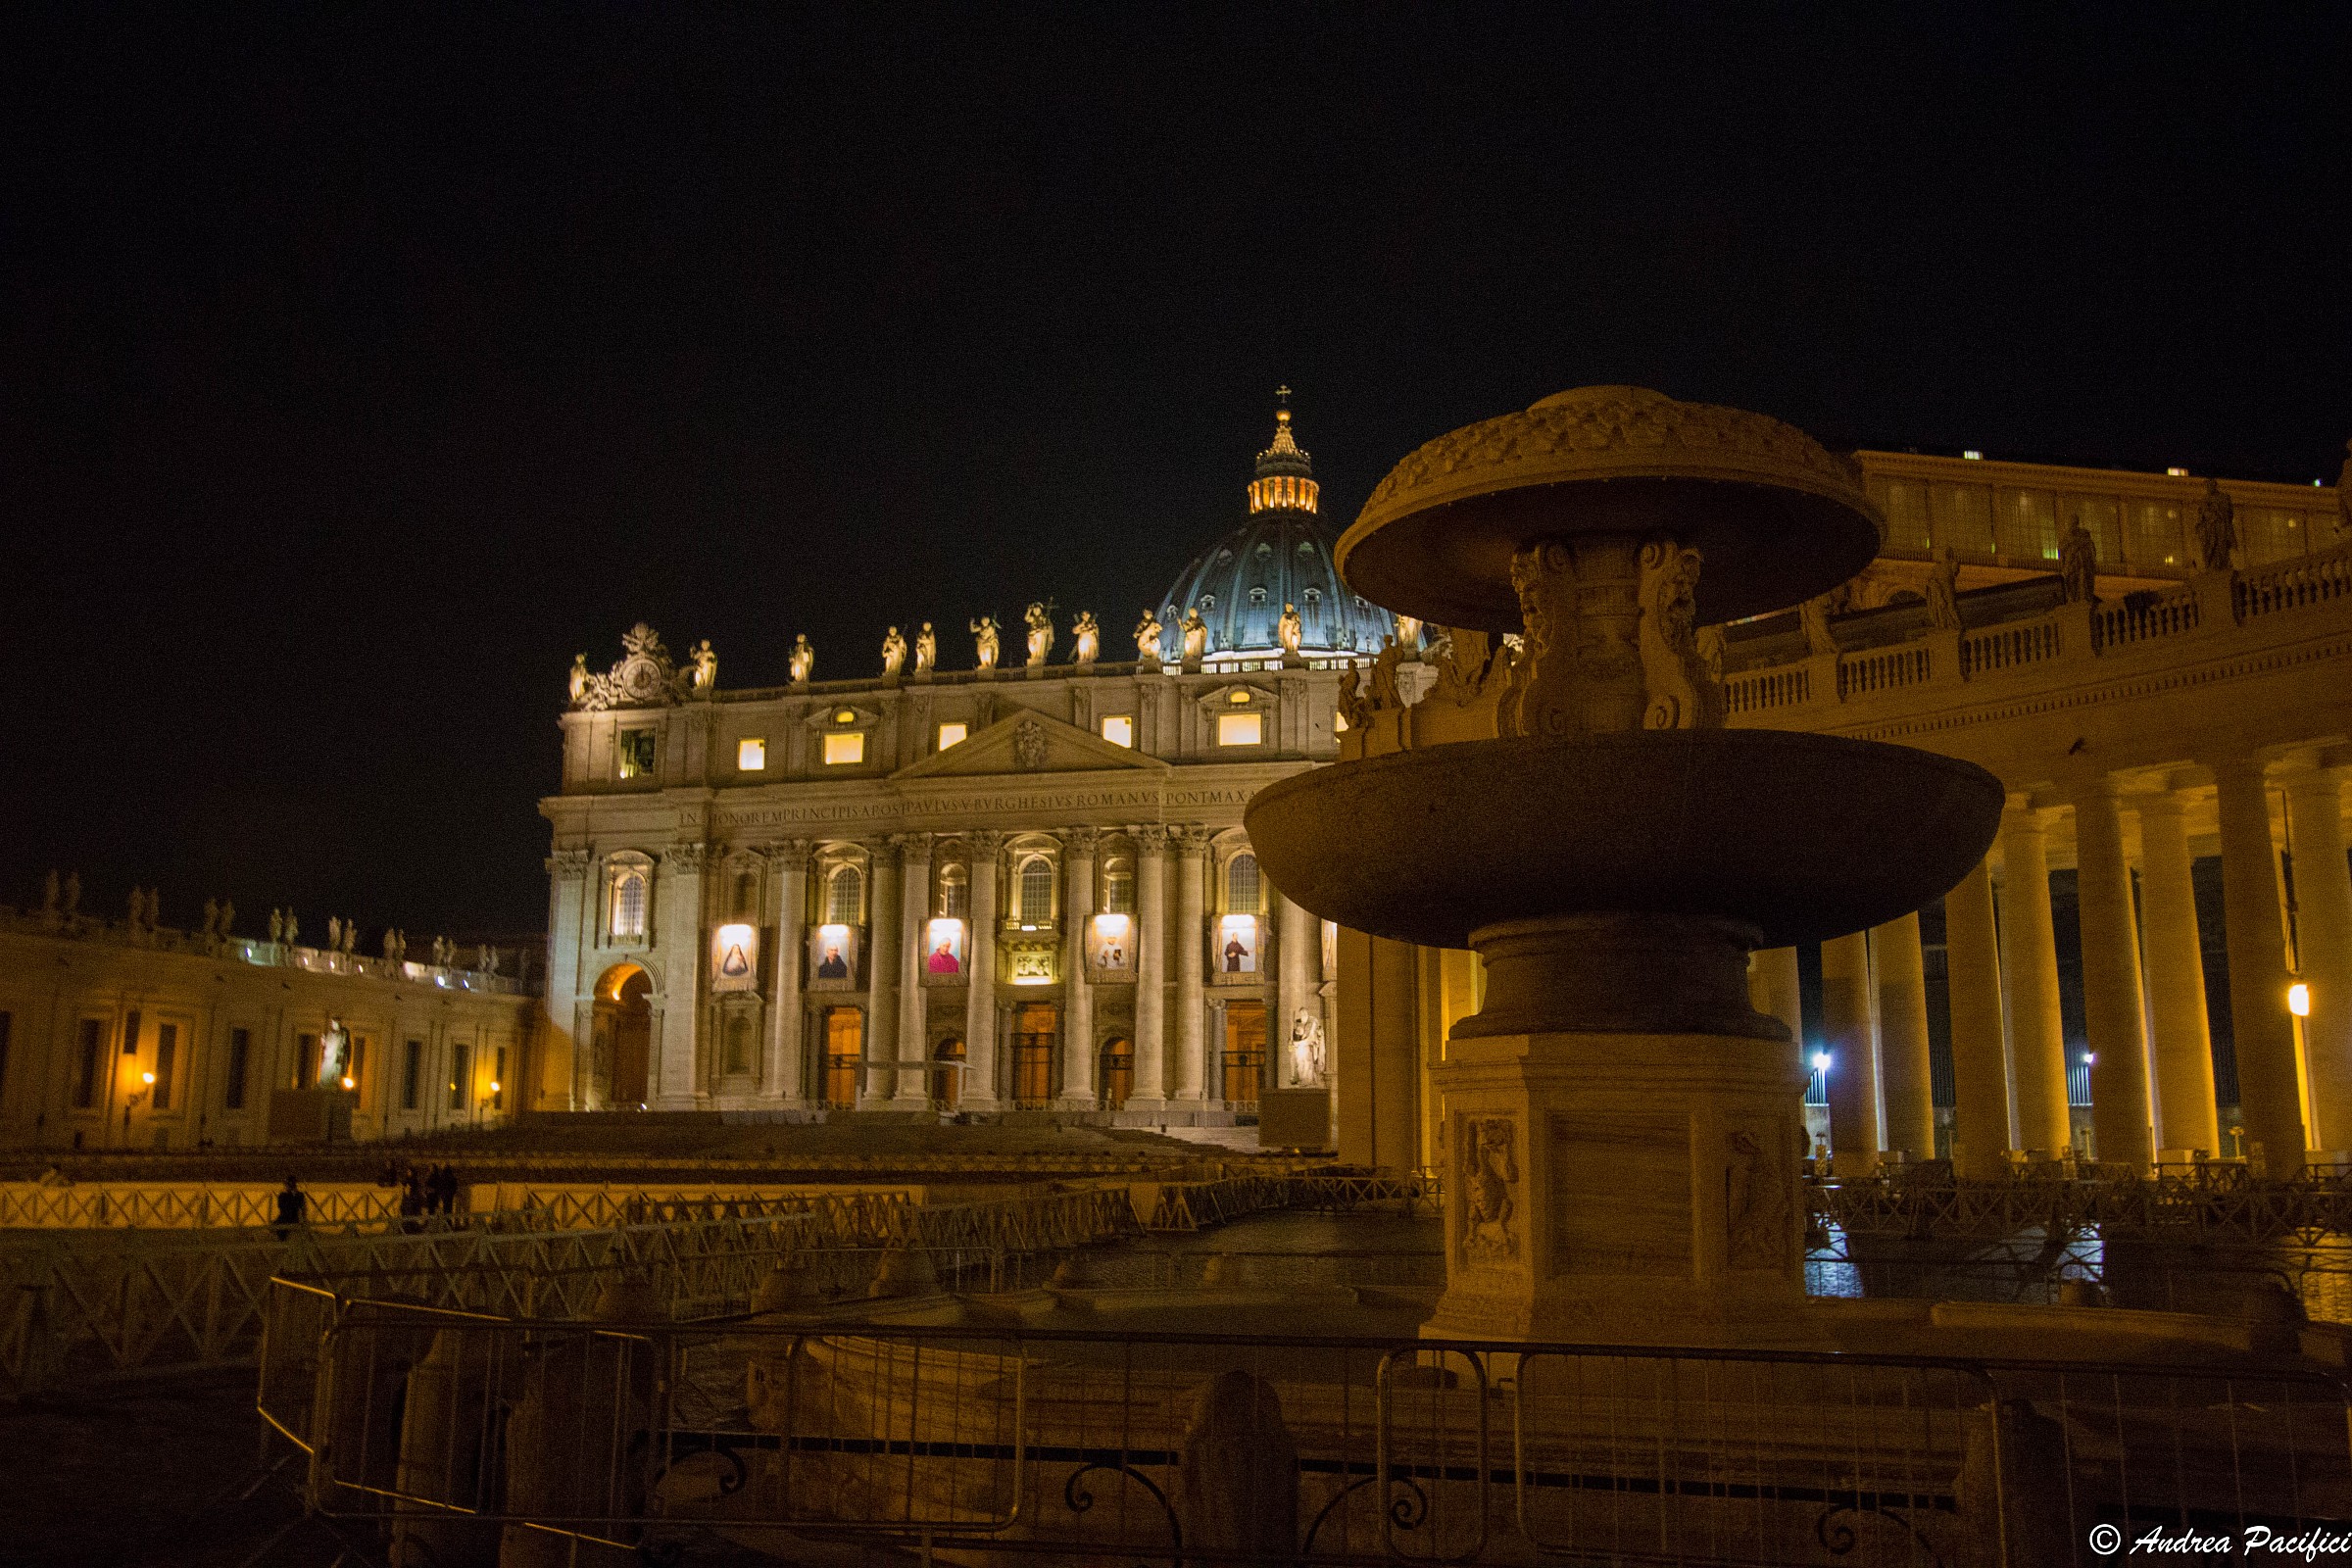 St. Peter the night...